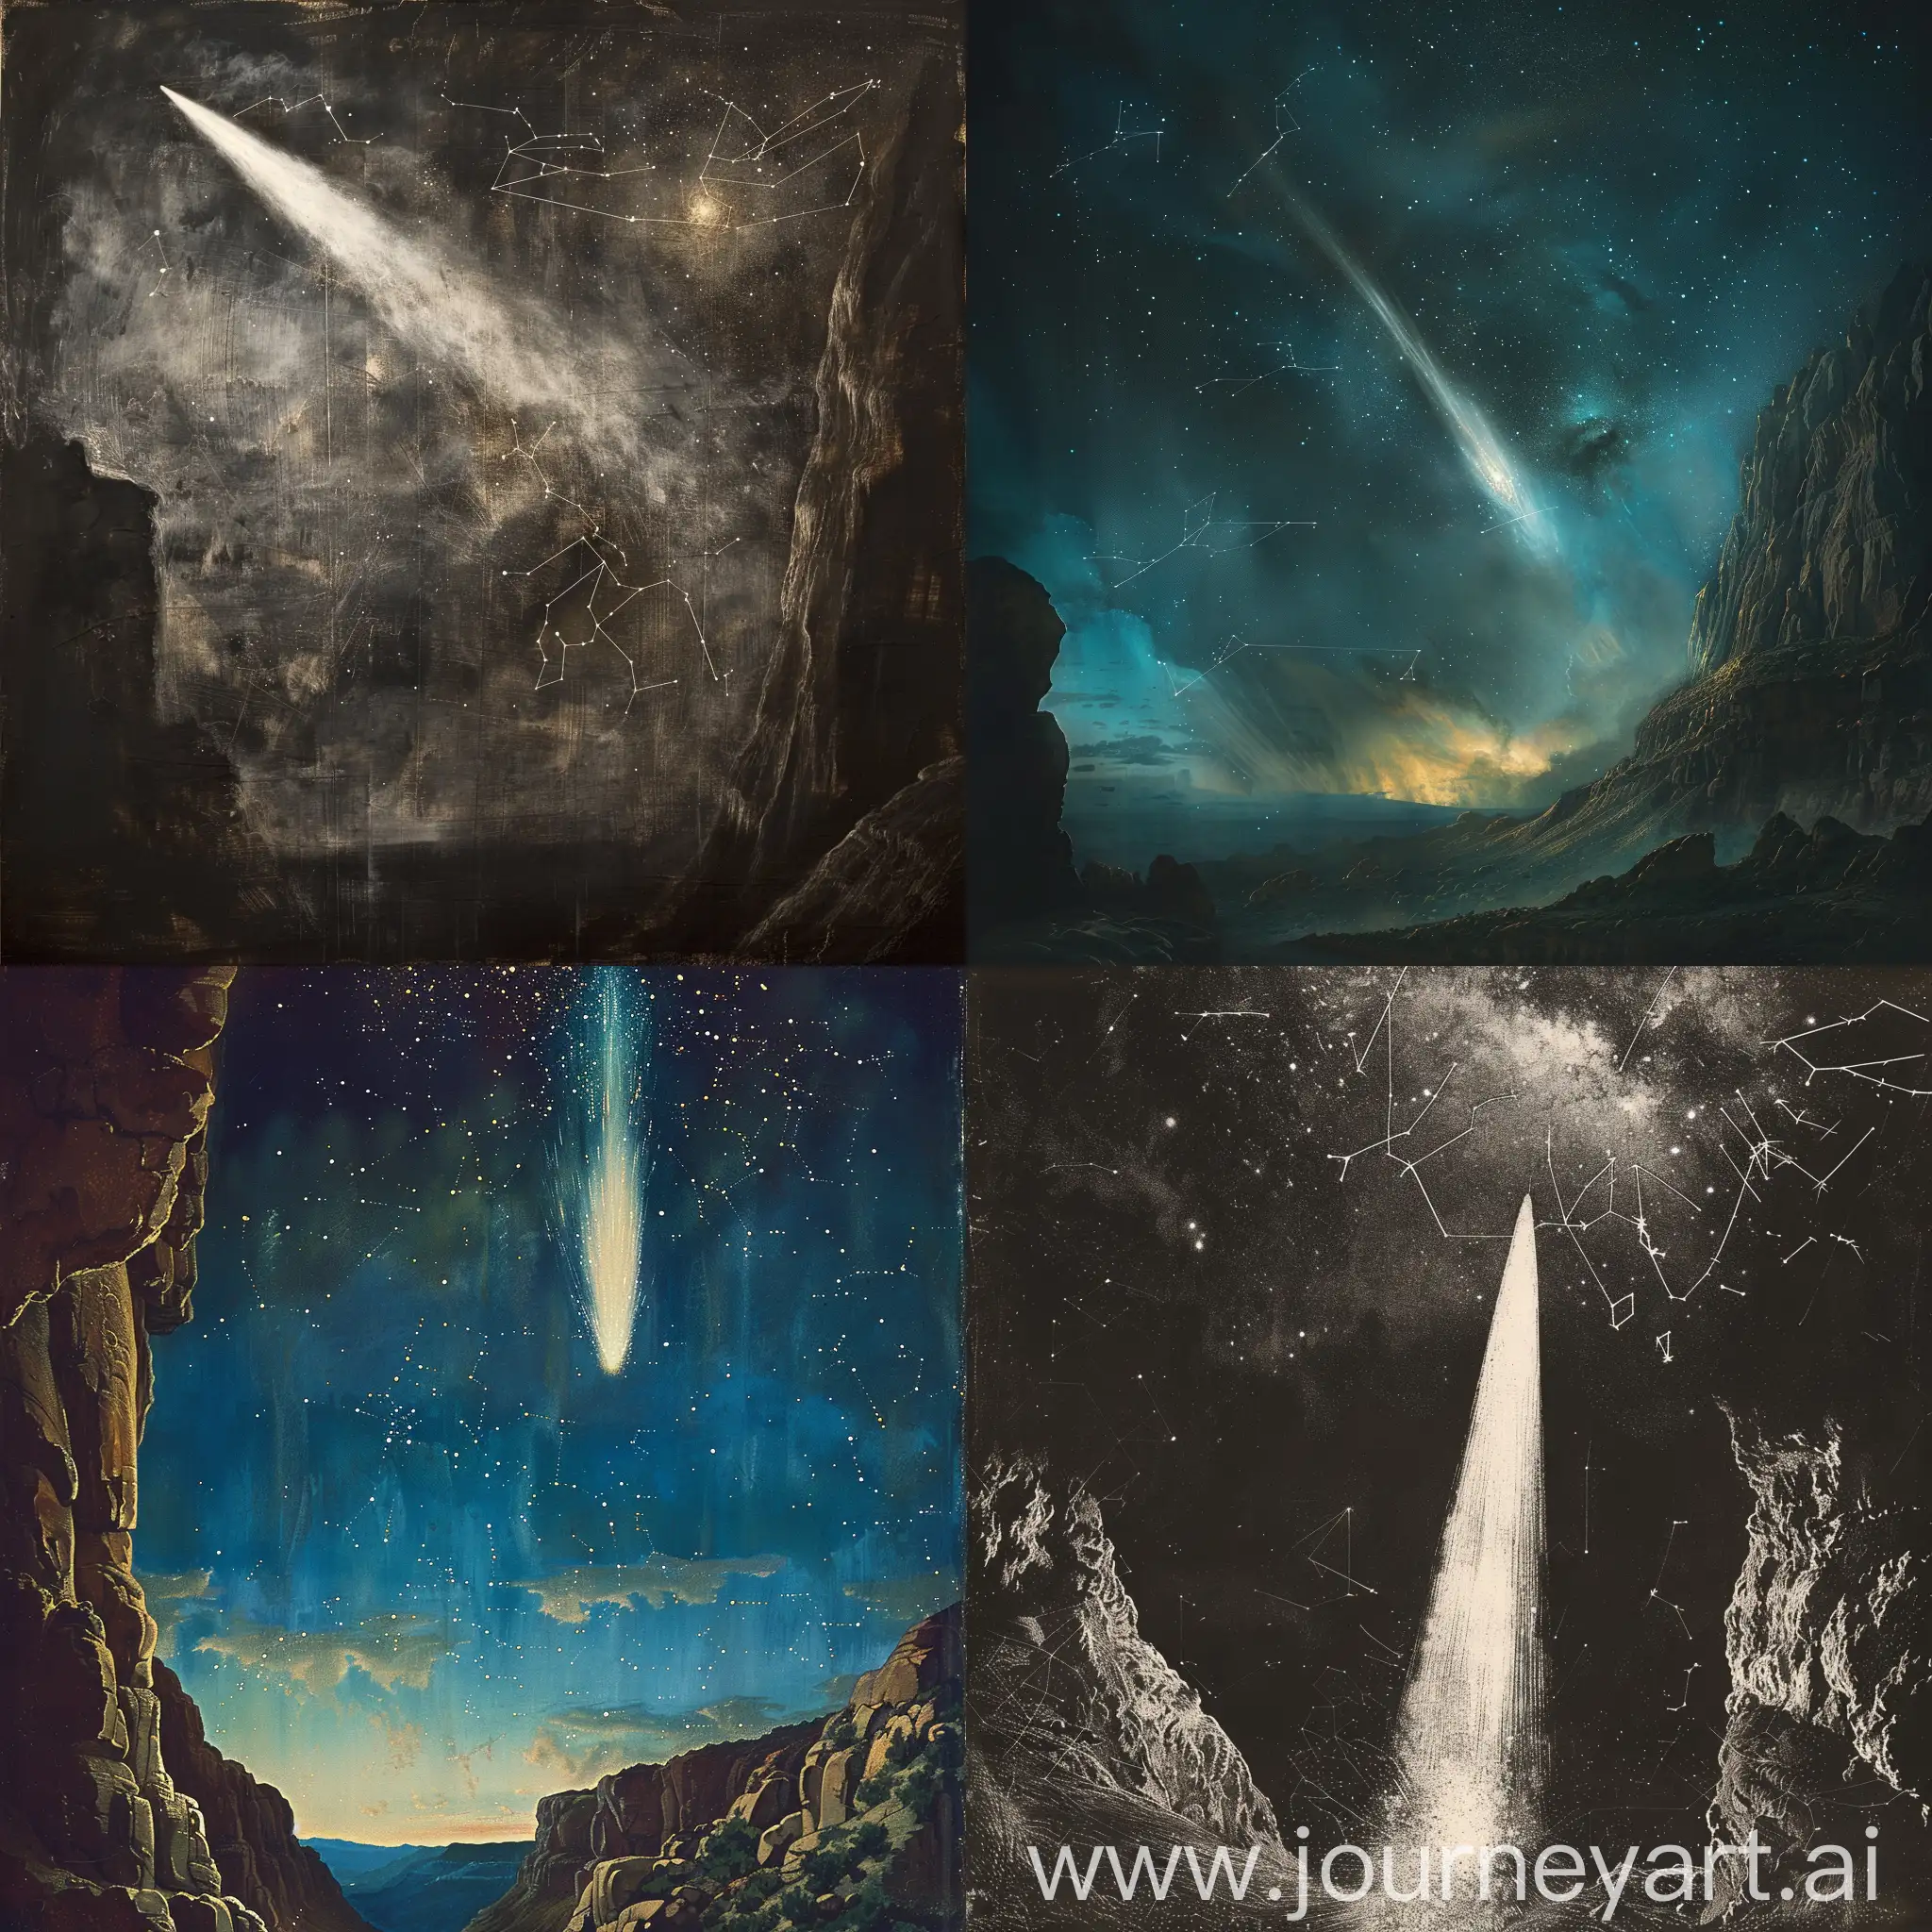 Enigmatic-Night-Sky-with-Comet-Trail-and-Ancient-Cave-Maps